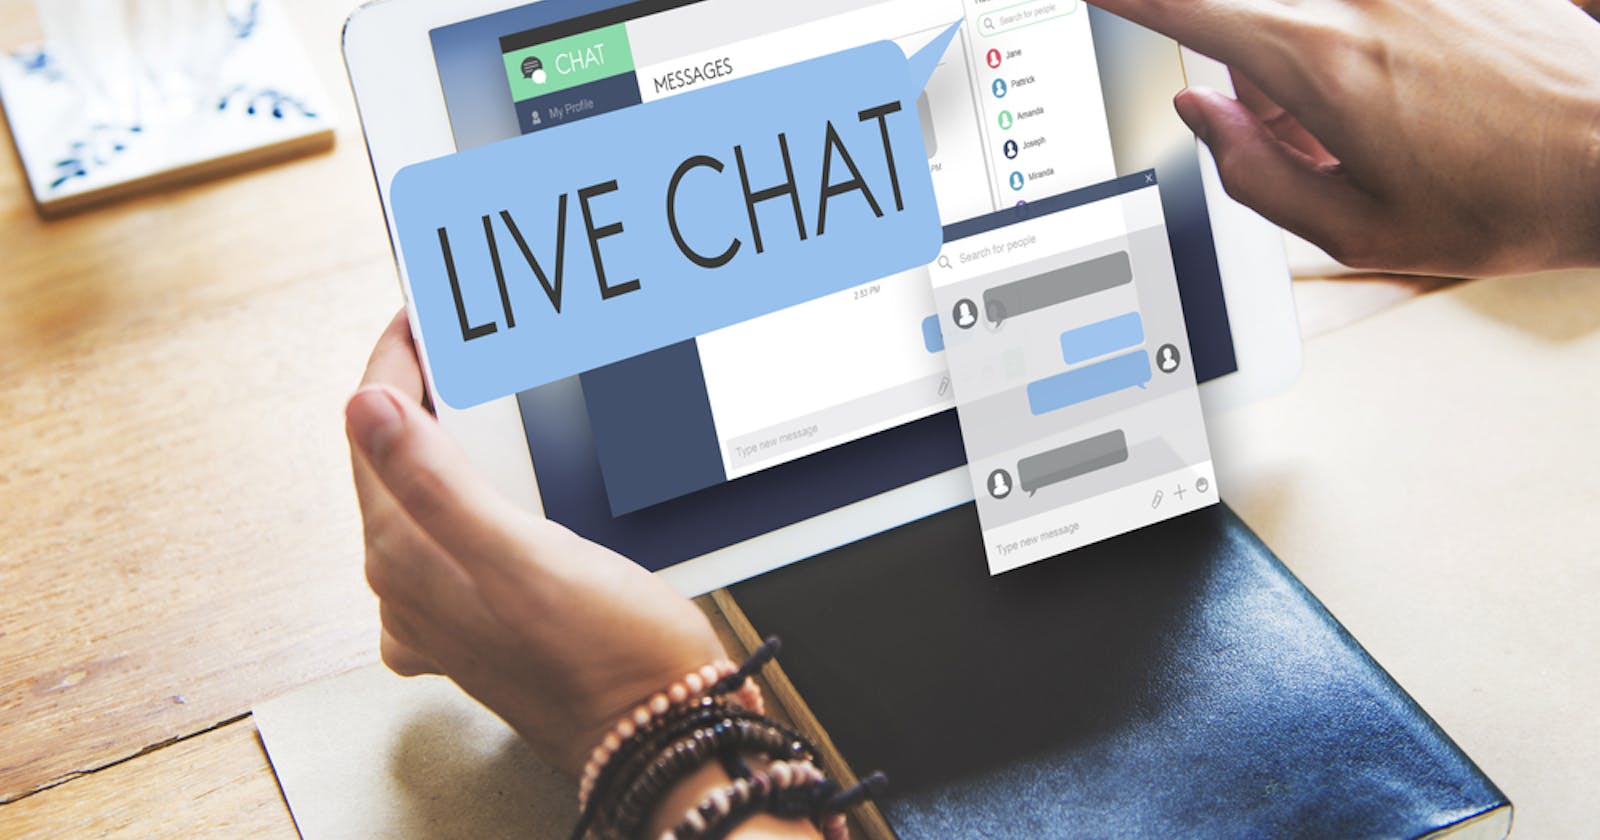 How to Implement Super Live Chat: 3 Methods You Should Know